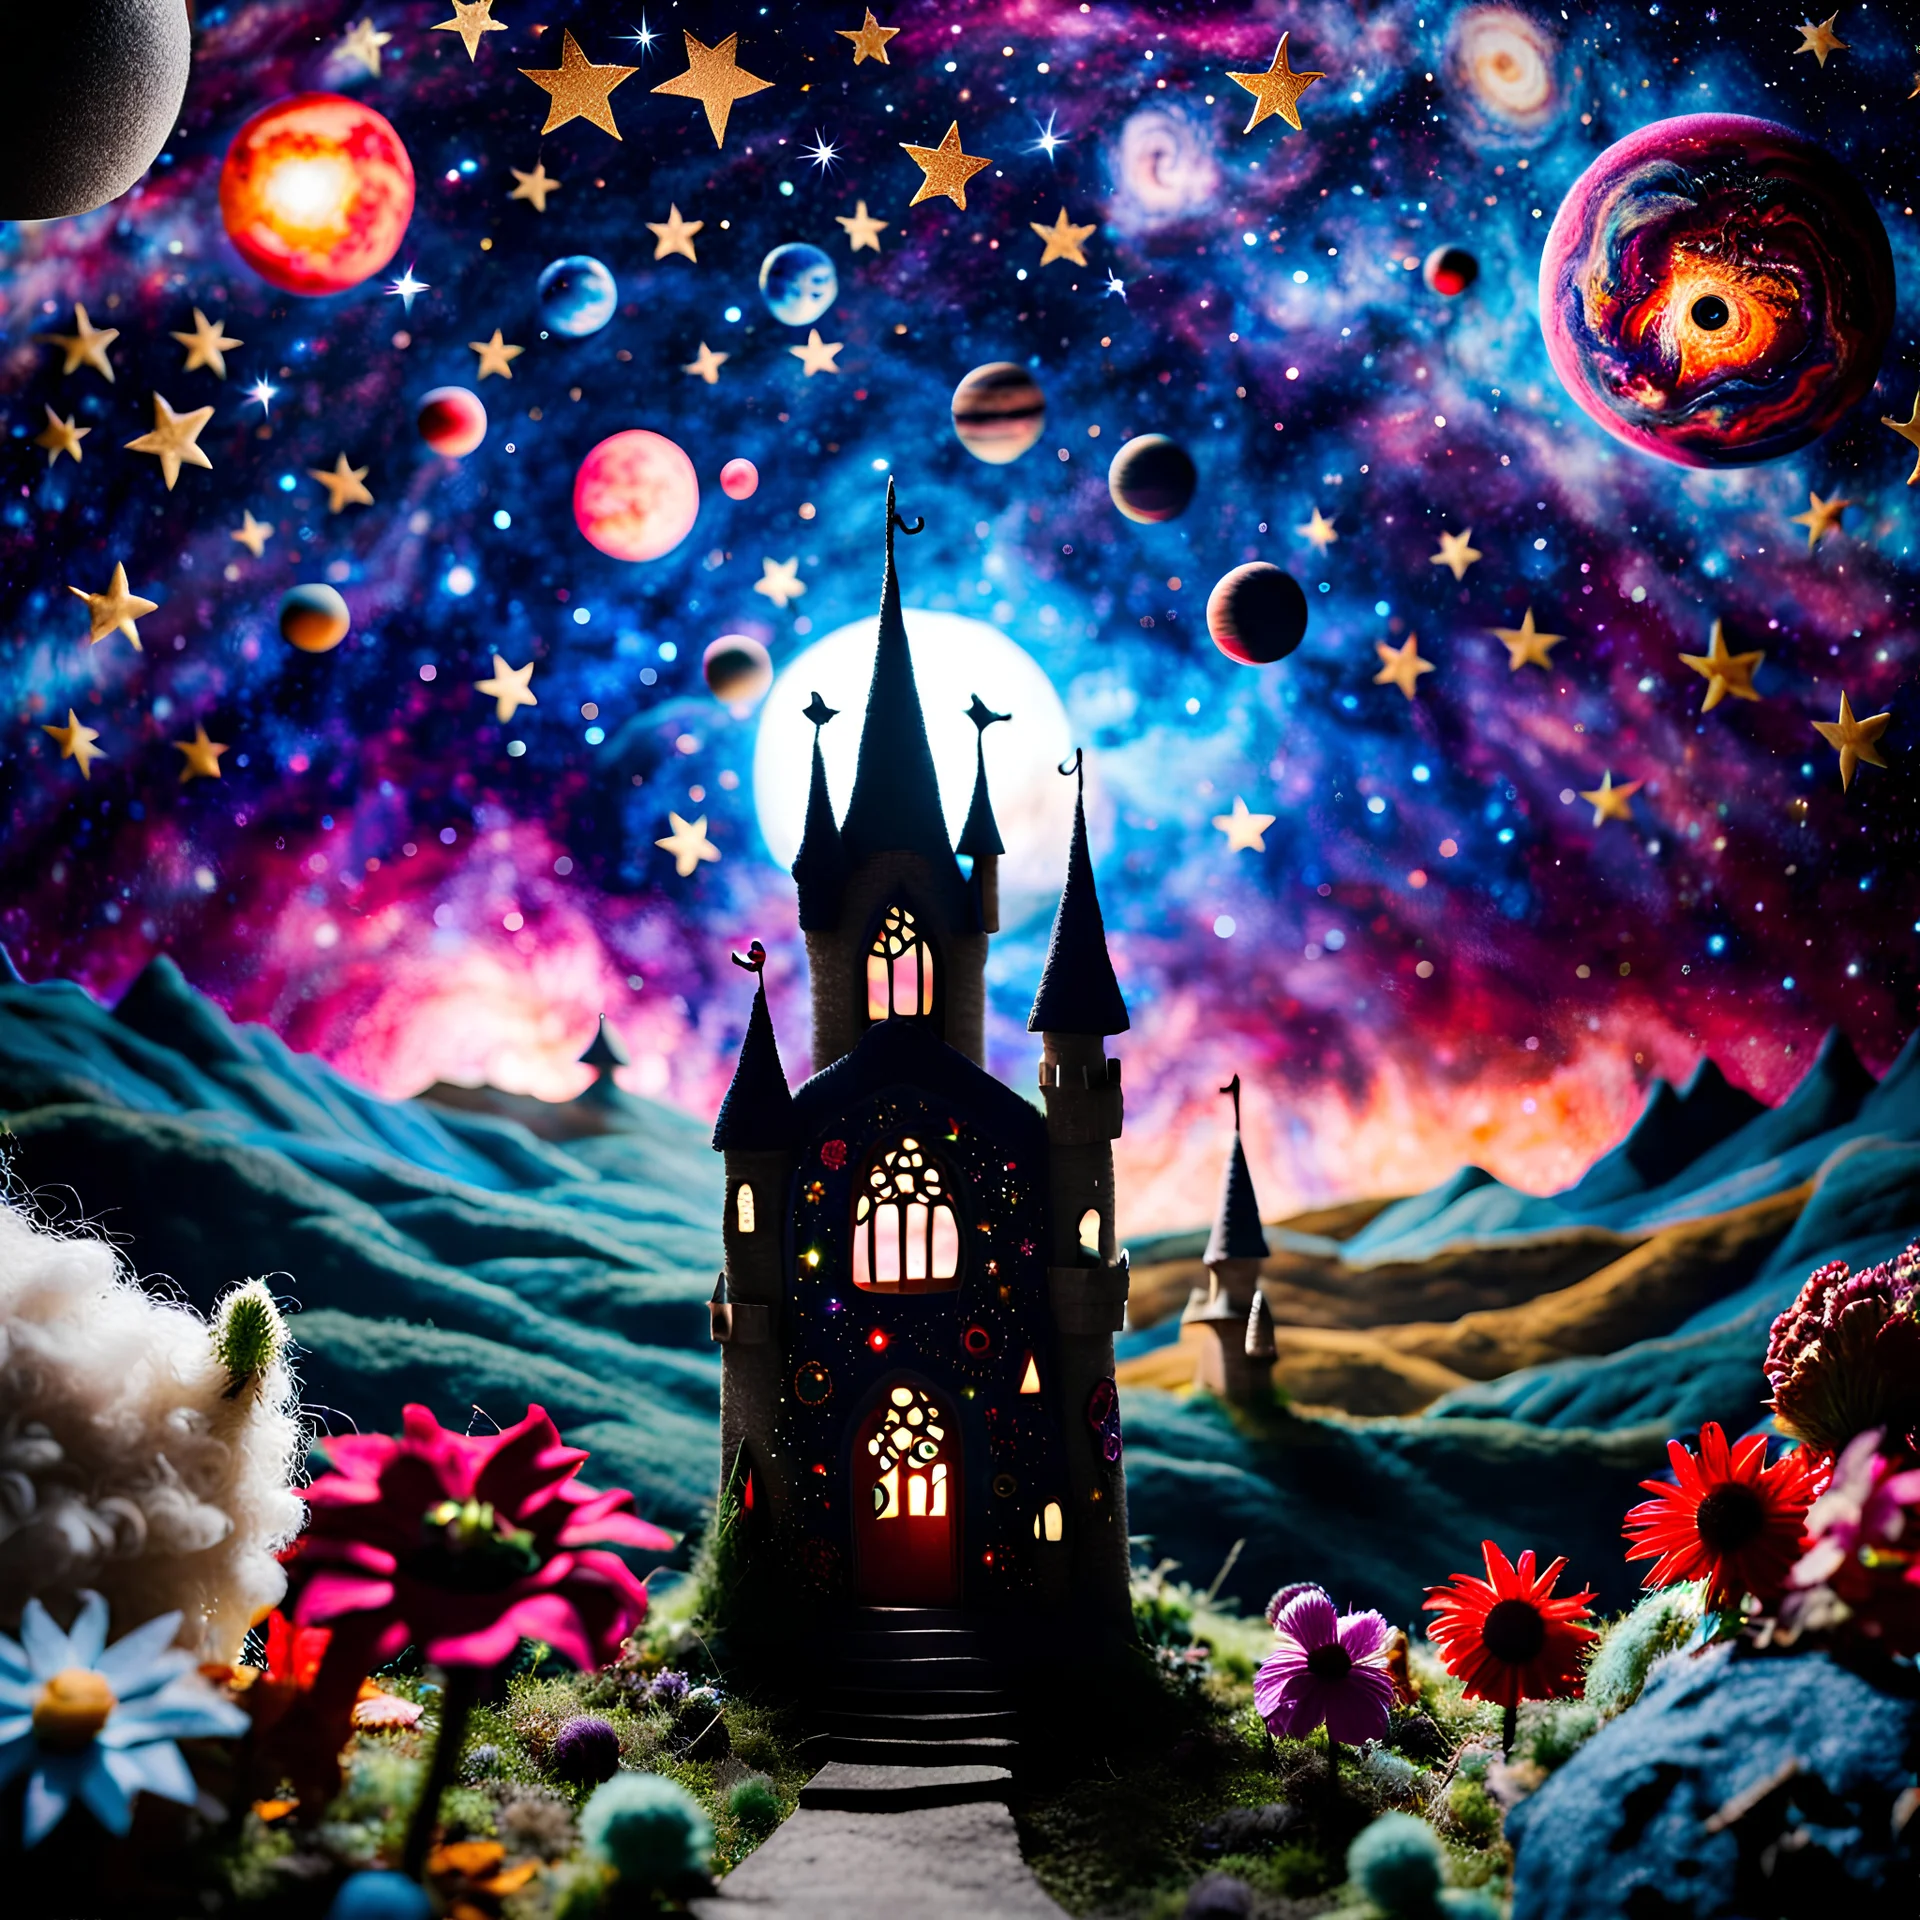 Detailed people, creepy castle made of felt, stars, galaxy and planets, sun, volumetric light flowers, naïve, strong texture, extreme detail, Max Ernst, decal, rich moody colors, sparkles, Harry Potter, bokeh, odd